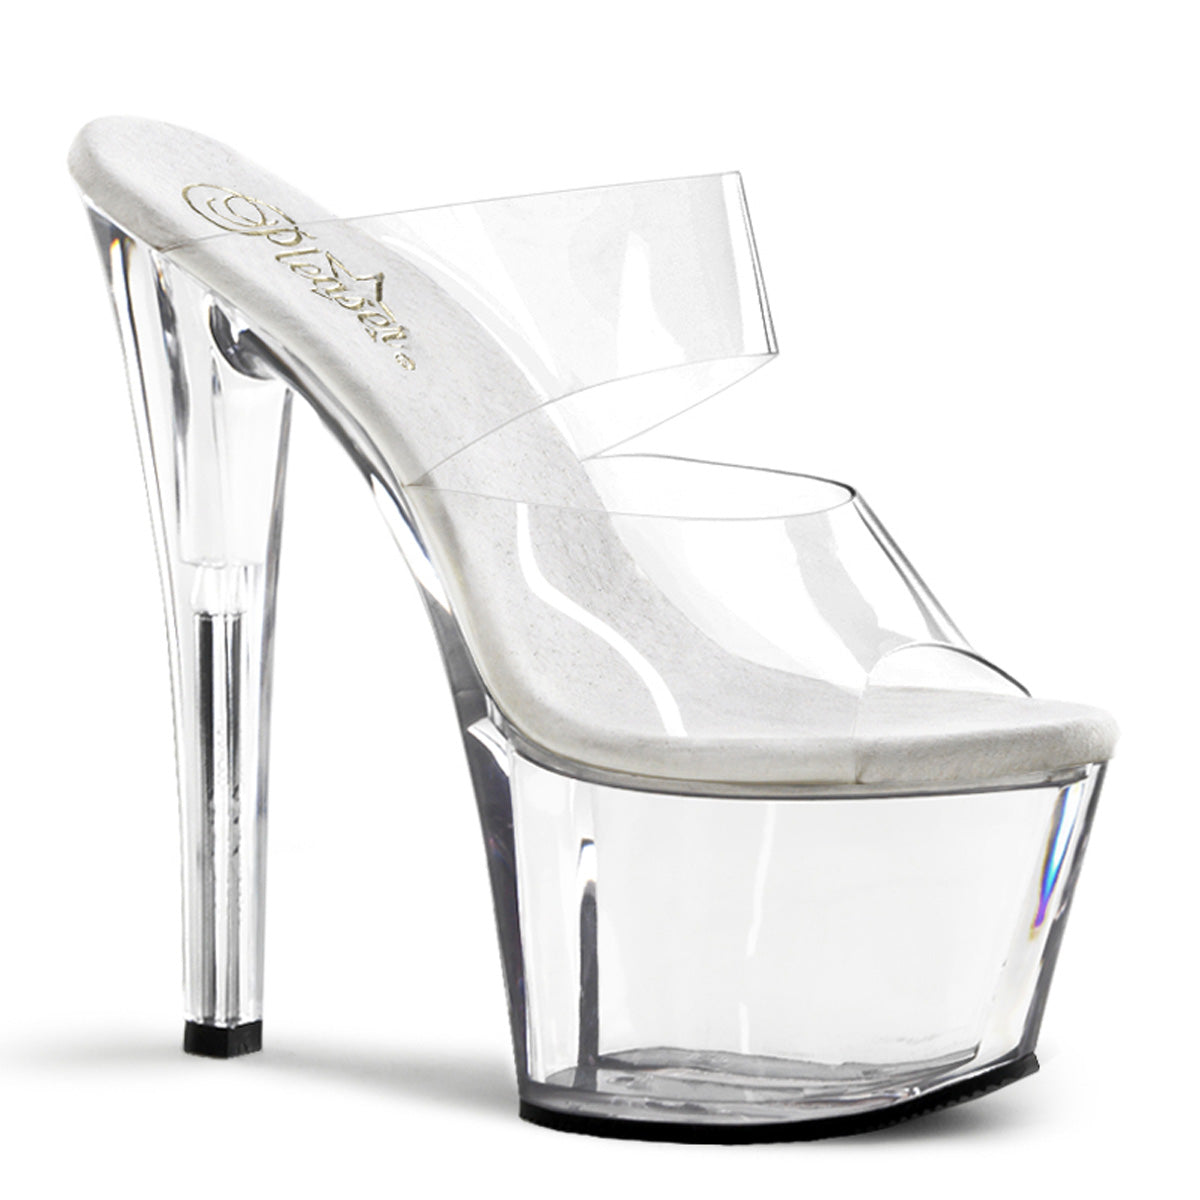 SKY-302 Pleaser 7 Inch Heel Clear Pole Dancing Platforms-Pleaser- Sexy Shoes